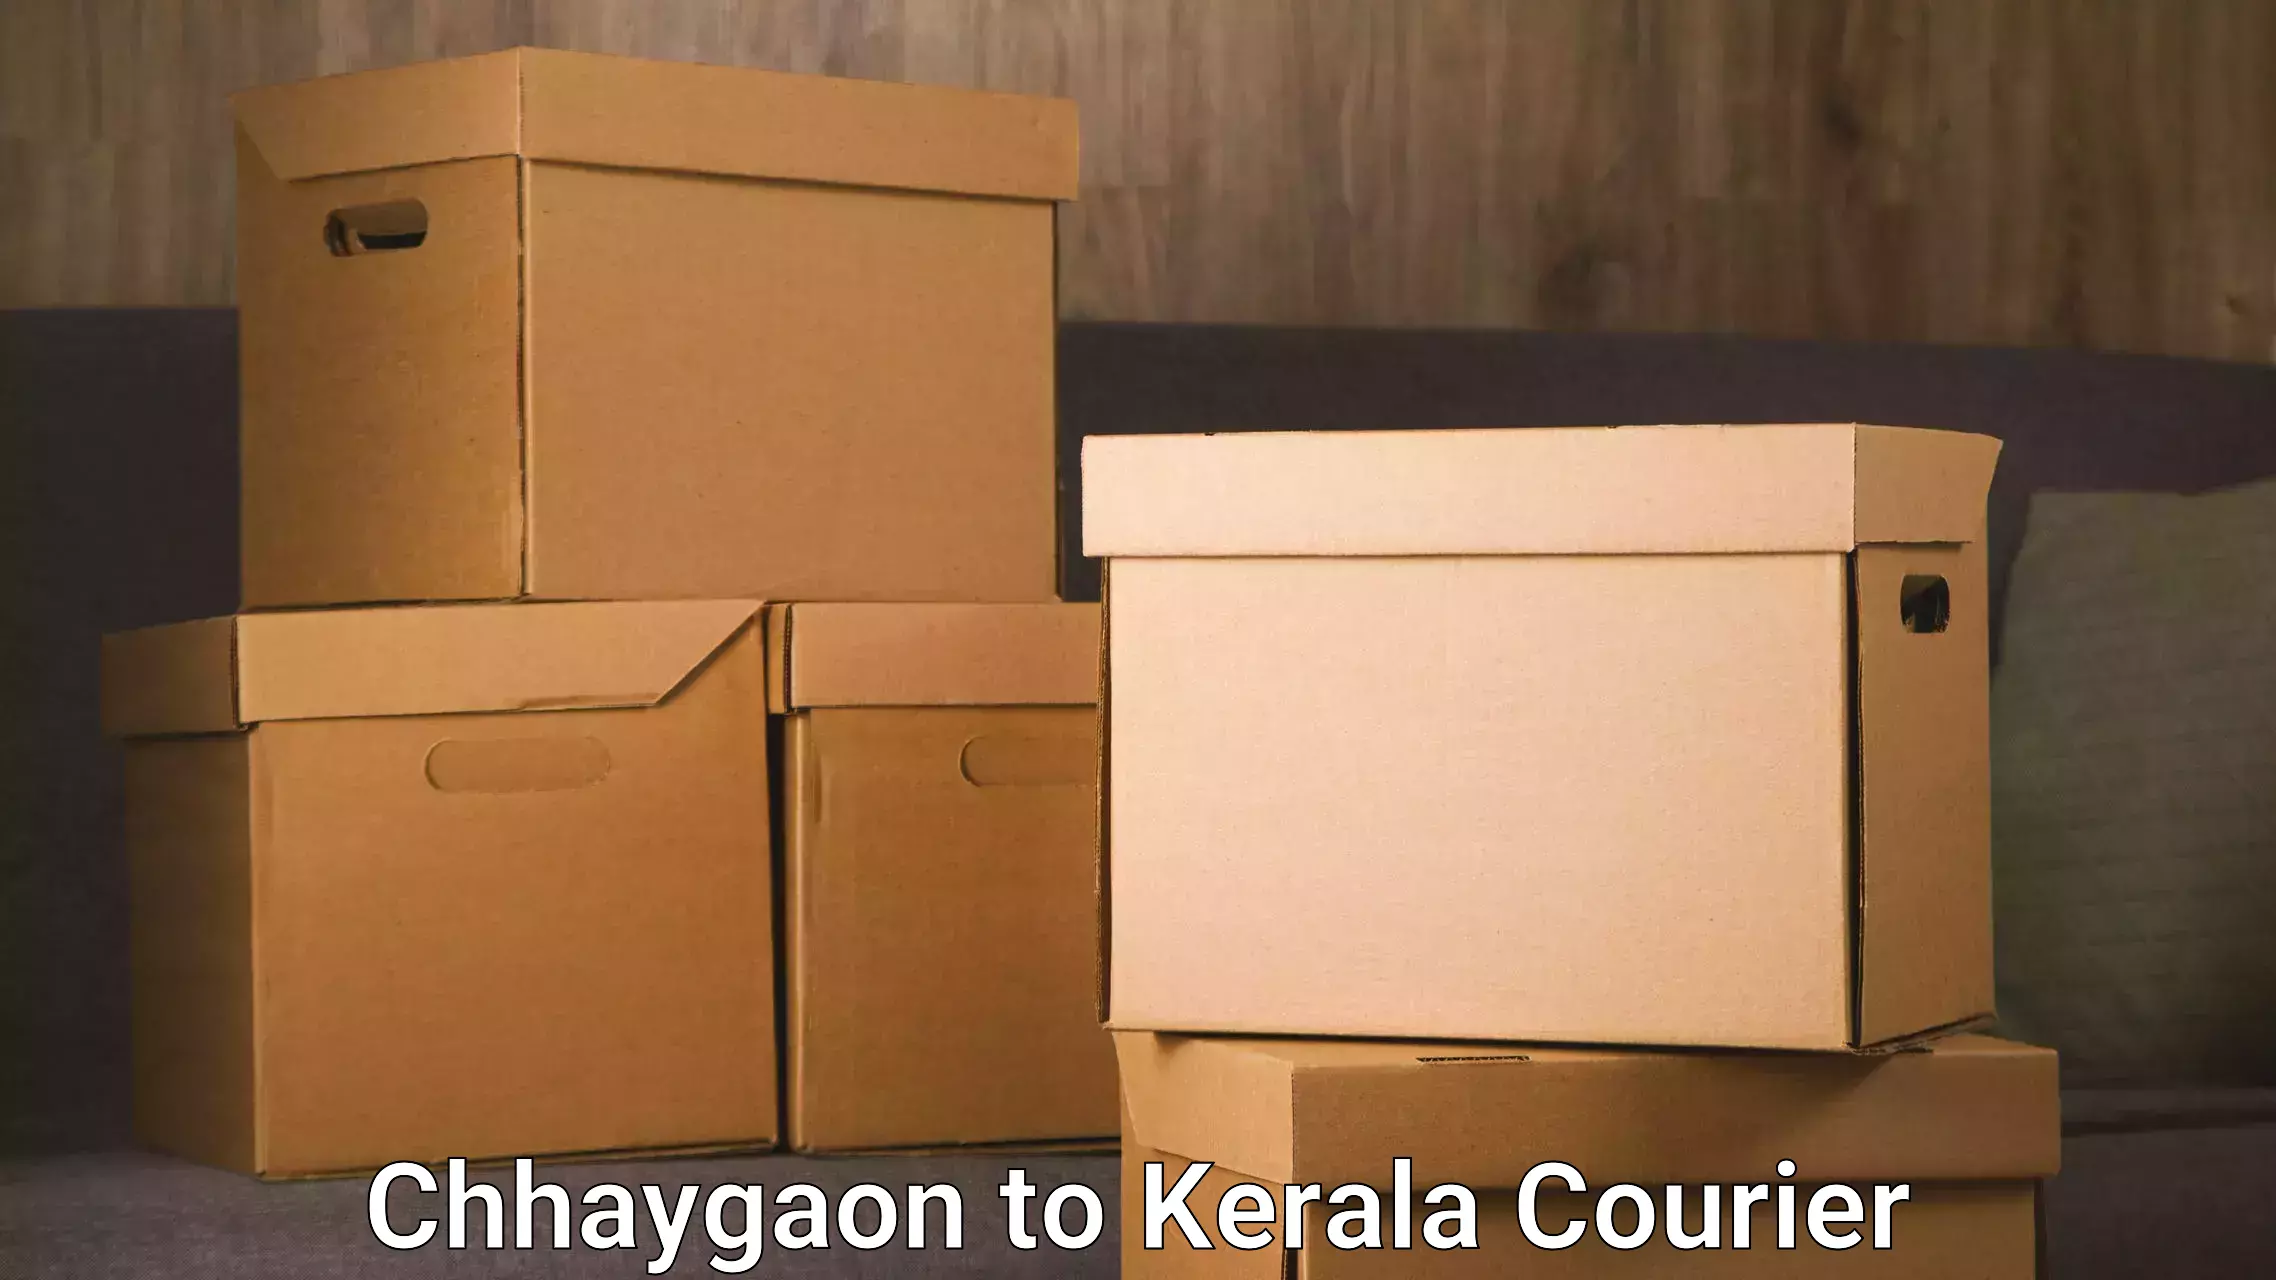 State-of-the-art courier technology Chhaygaon to Perinthalmanna